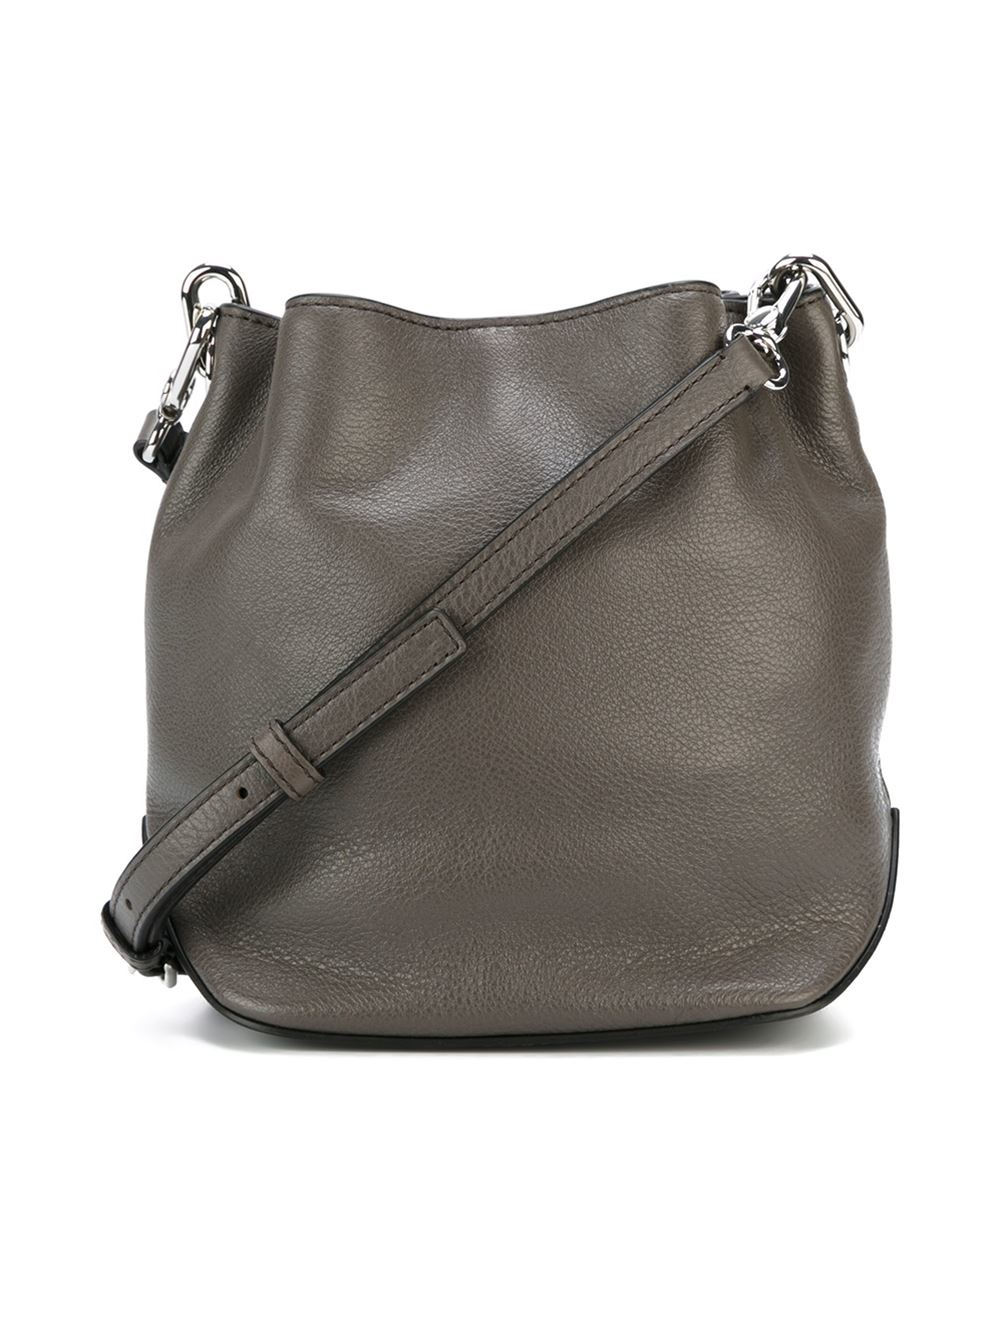 Marc by marc jacobs Drawstring Leather Shoulder Bag in Gray (grey) | Lyst